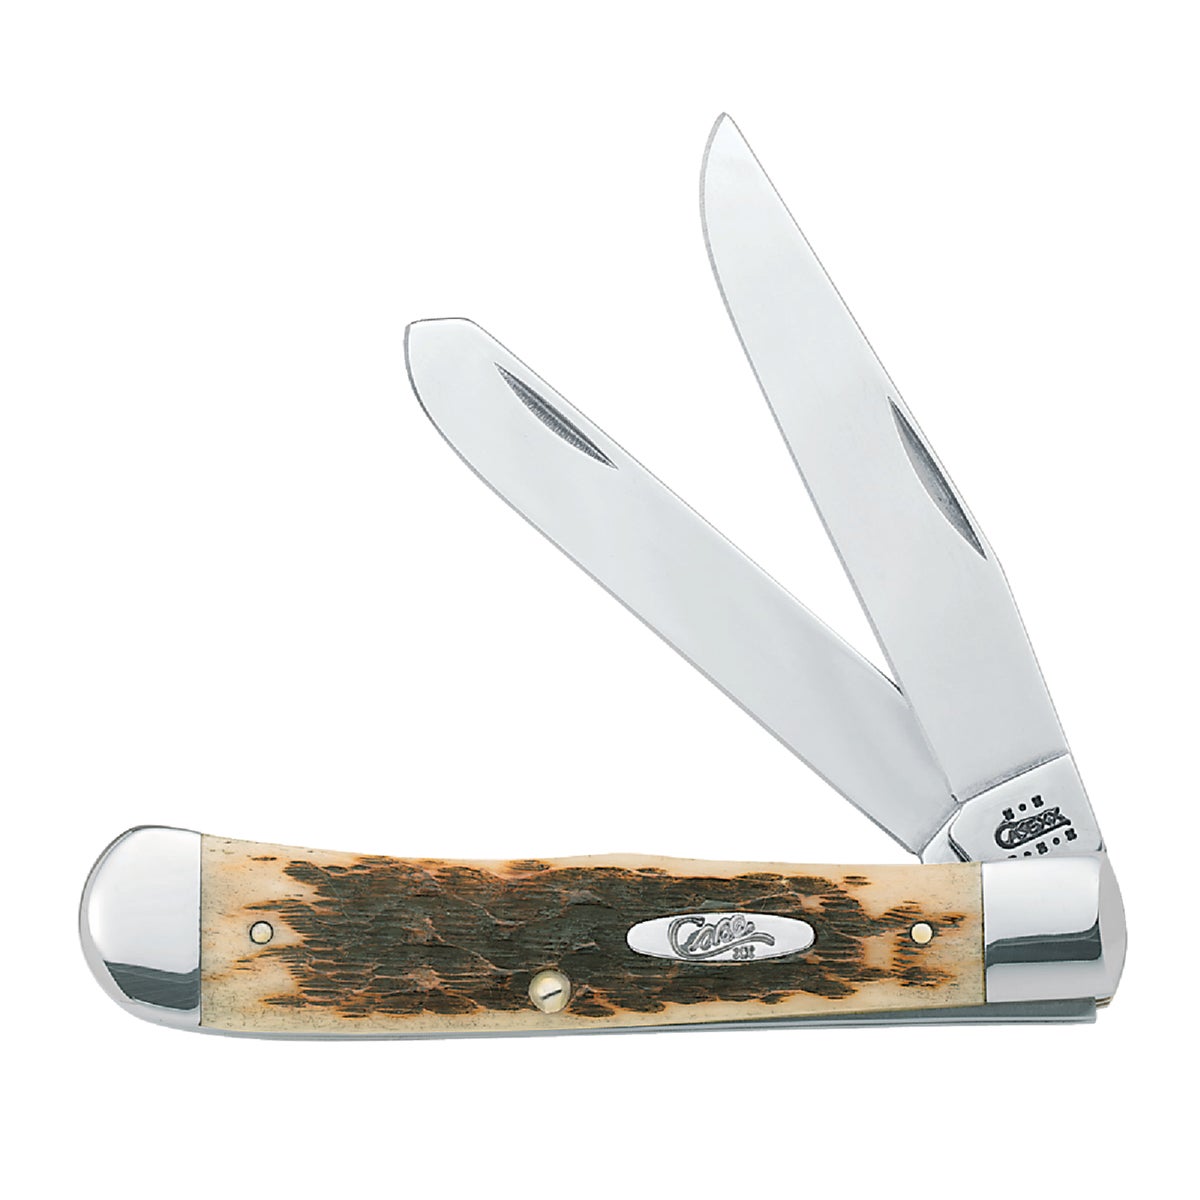 Item 810924, Pocket knife featuring a steel pocket clip and spey blades.